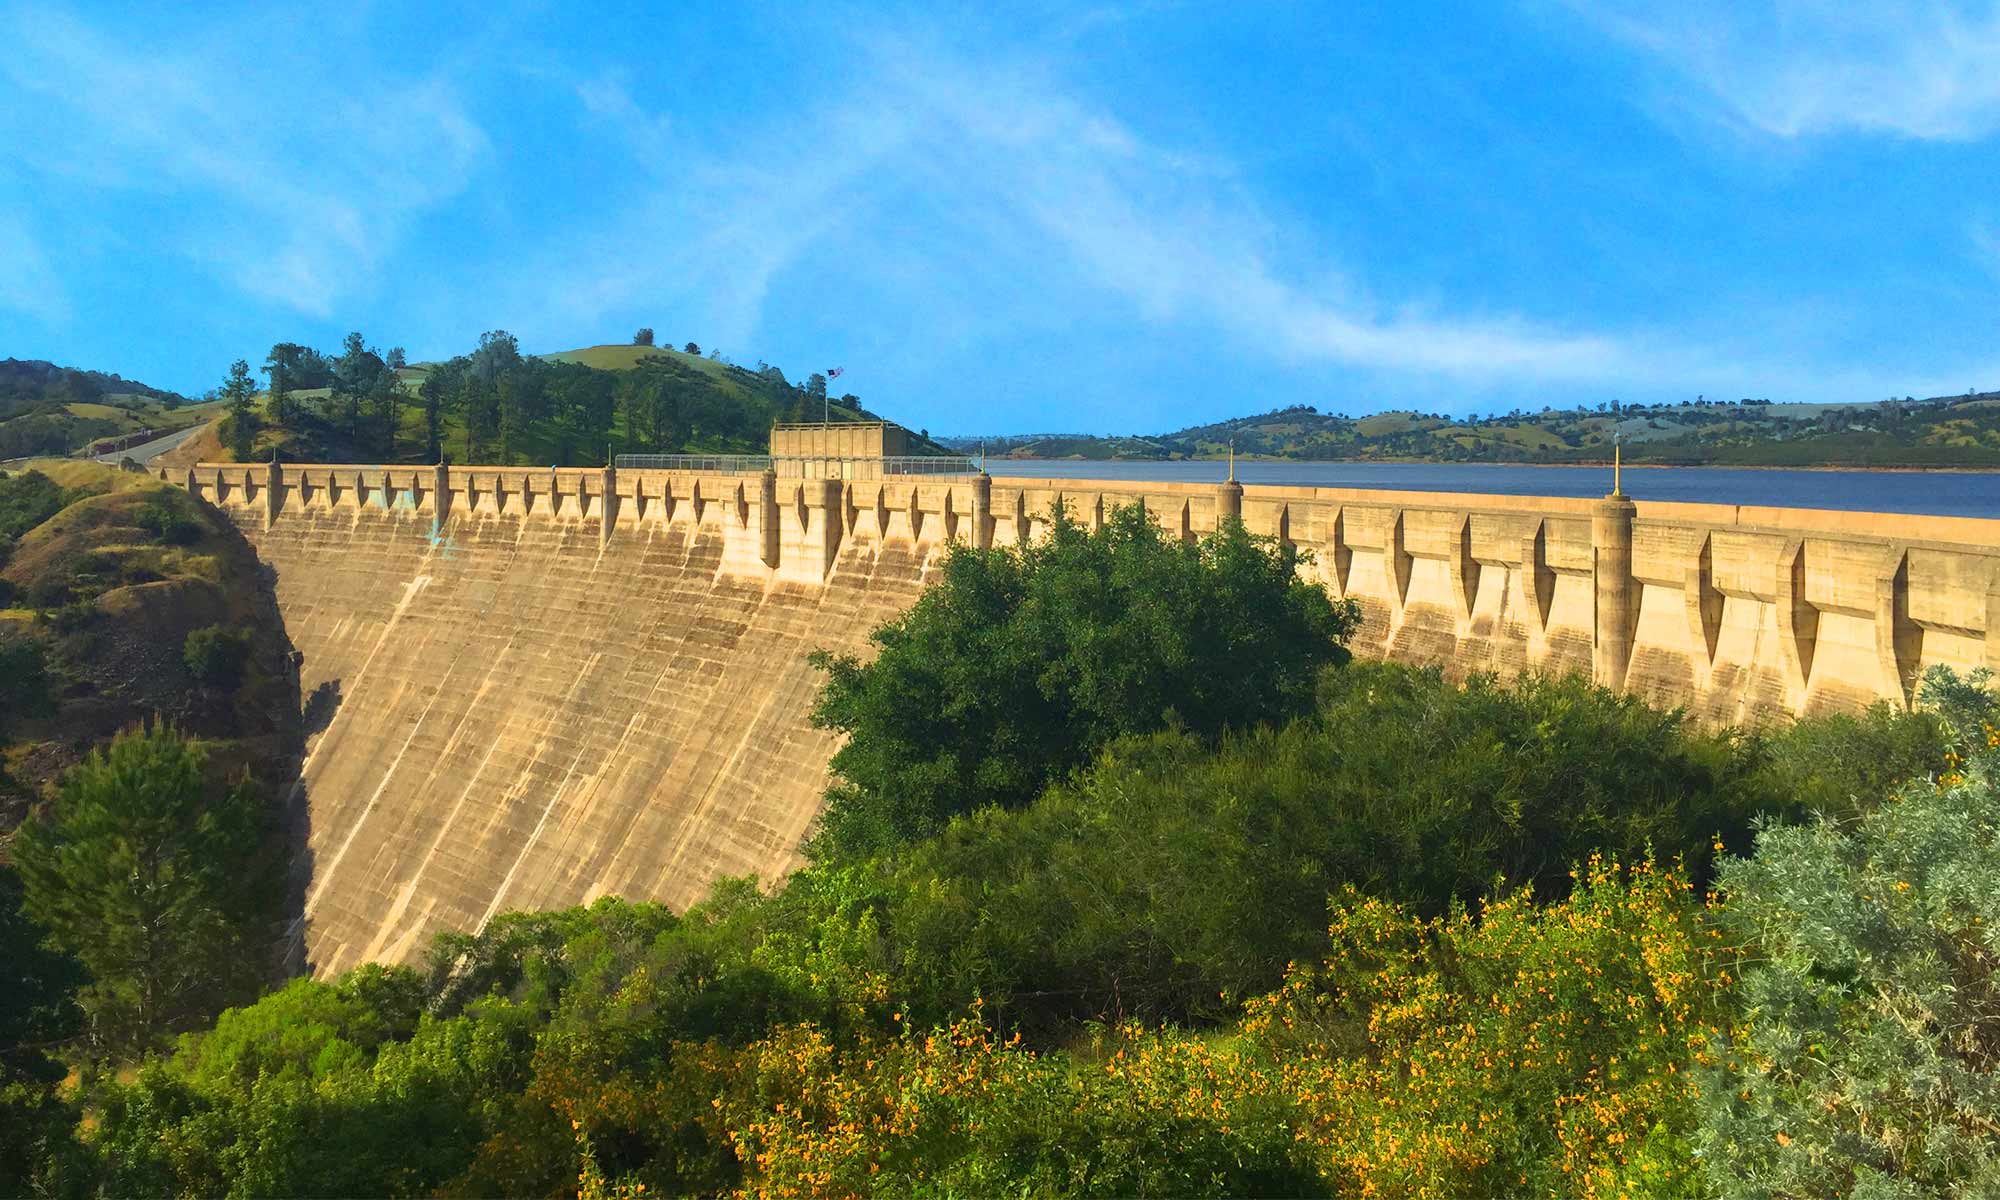 Photo of Pardee Reservoir Dam - part of the event course